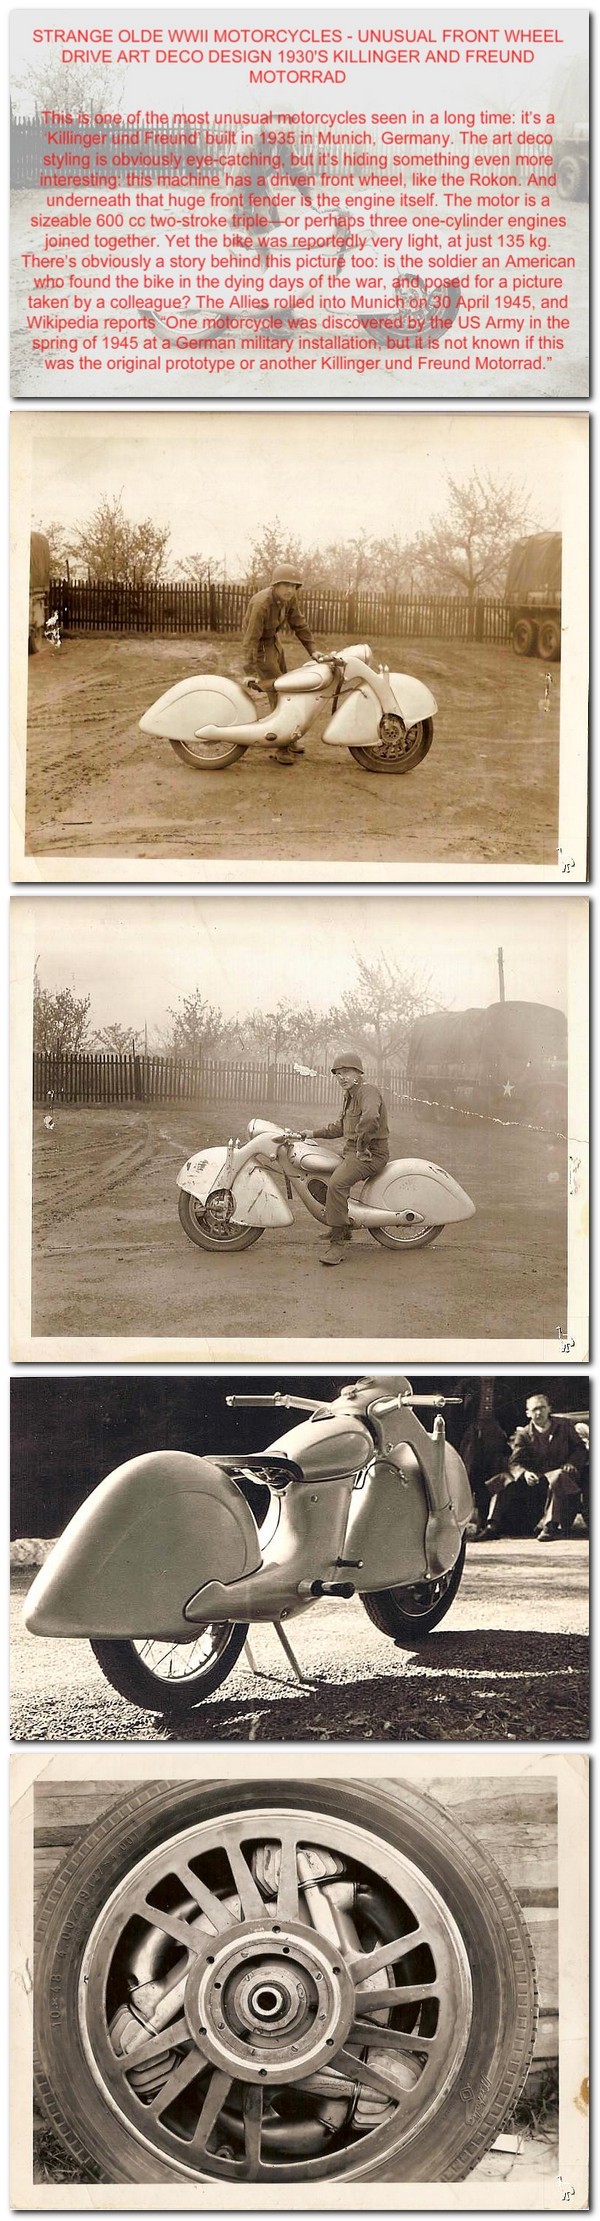 The Killinger and Freund Motorcycle was an attempt in 1935 by a group of five German engineers from Munich to design a more streamlined and modified version of the German Megola front-wheel drive motorcycle.1 The work took three years to complete but the result was impressive. The engine displacement stayed the same as the Megola at 600 cc but was 